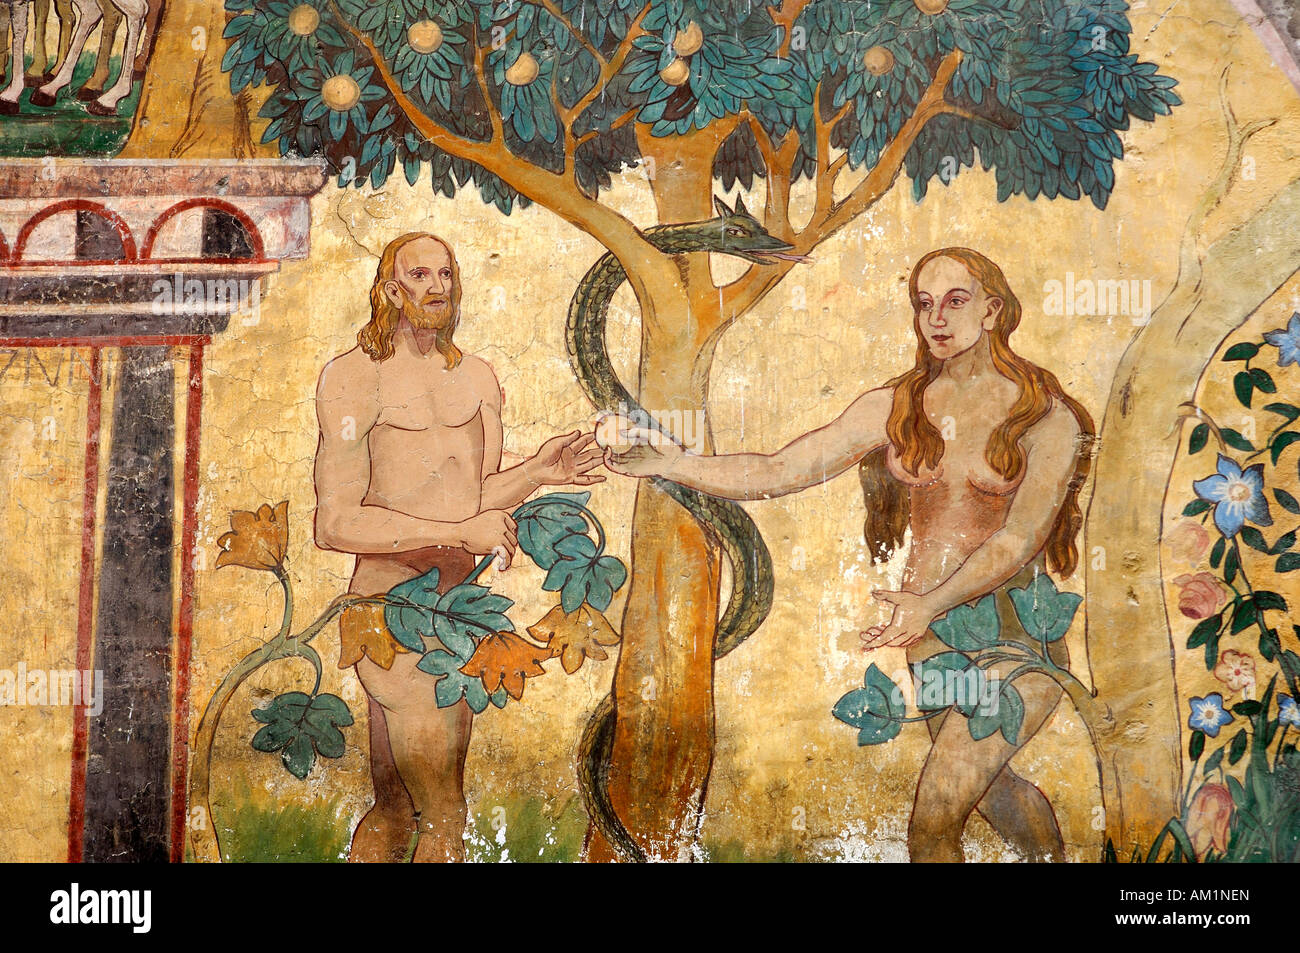 Adam and Eve in the Garden of Eden, Sgraffito outdoor wall painting, Ardez, Engadin, Grisons, Switzerland Stock Photo